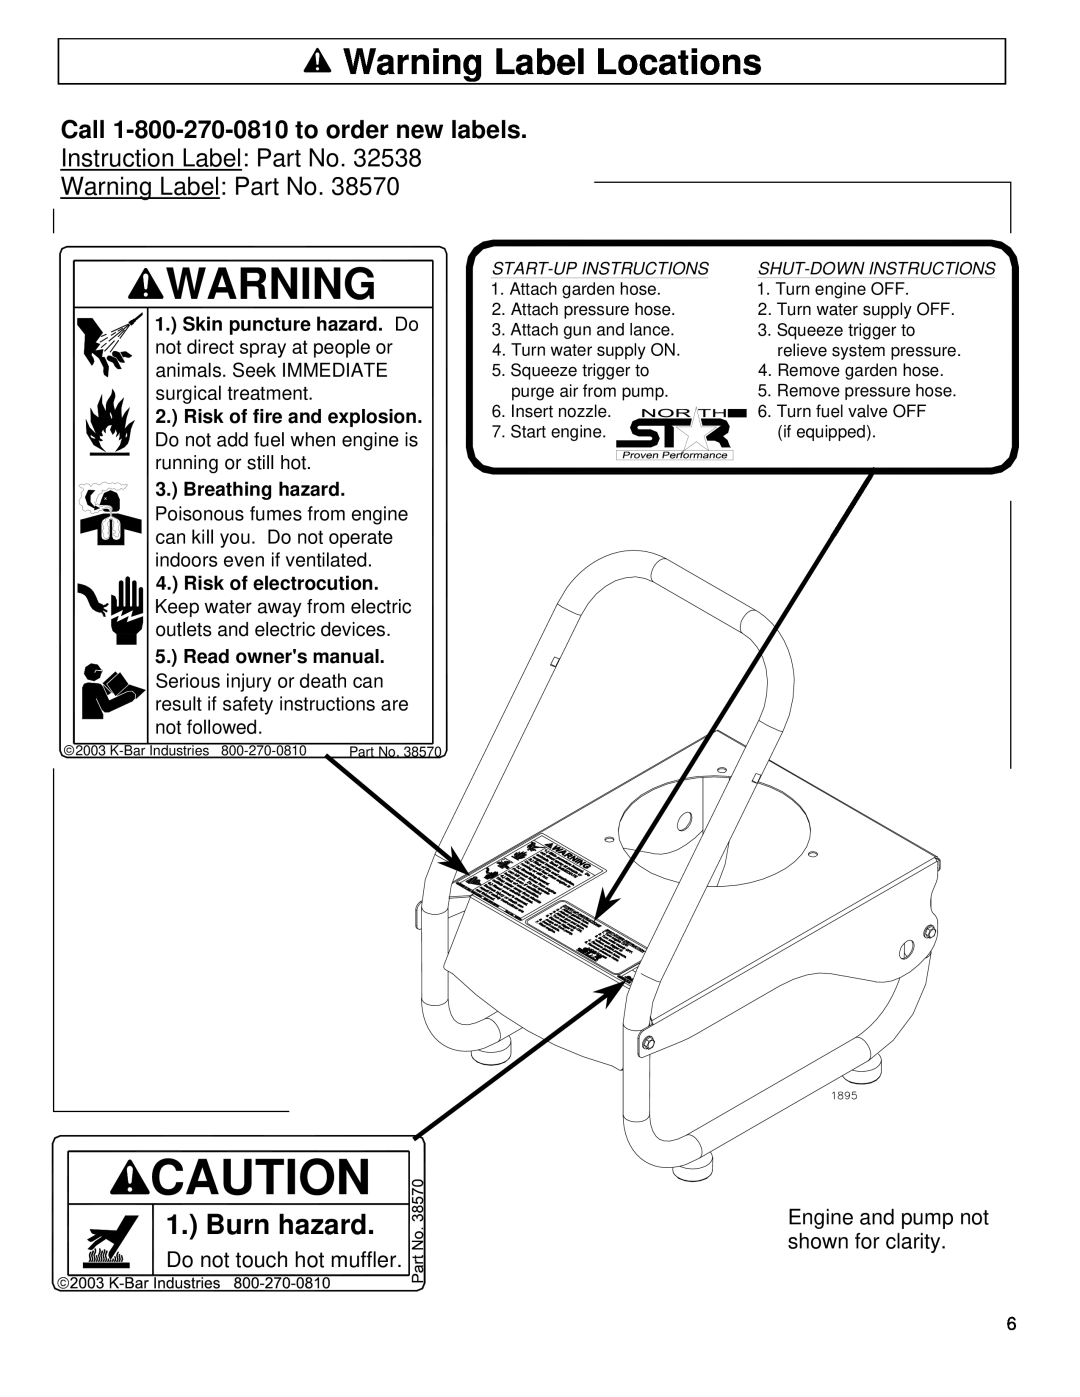 North Star M157477A Warning Label Locations, Burn hazard, Call 1-800-270-0810 to order new labels, Breathing hazard 